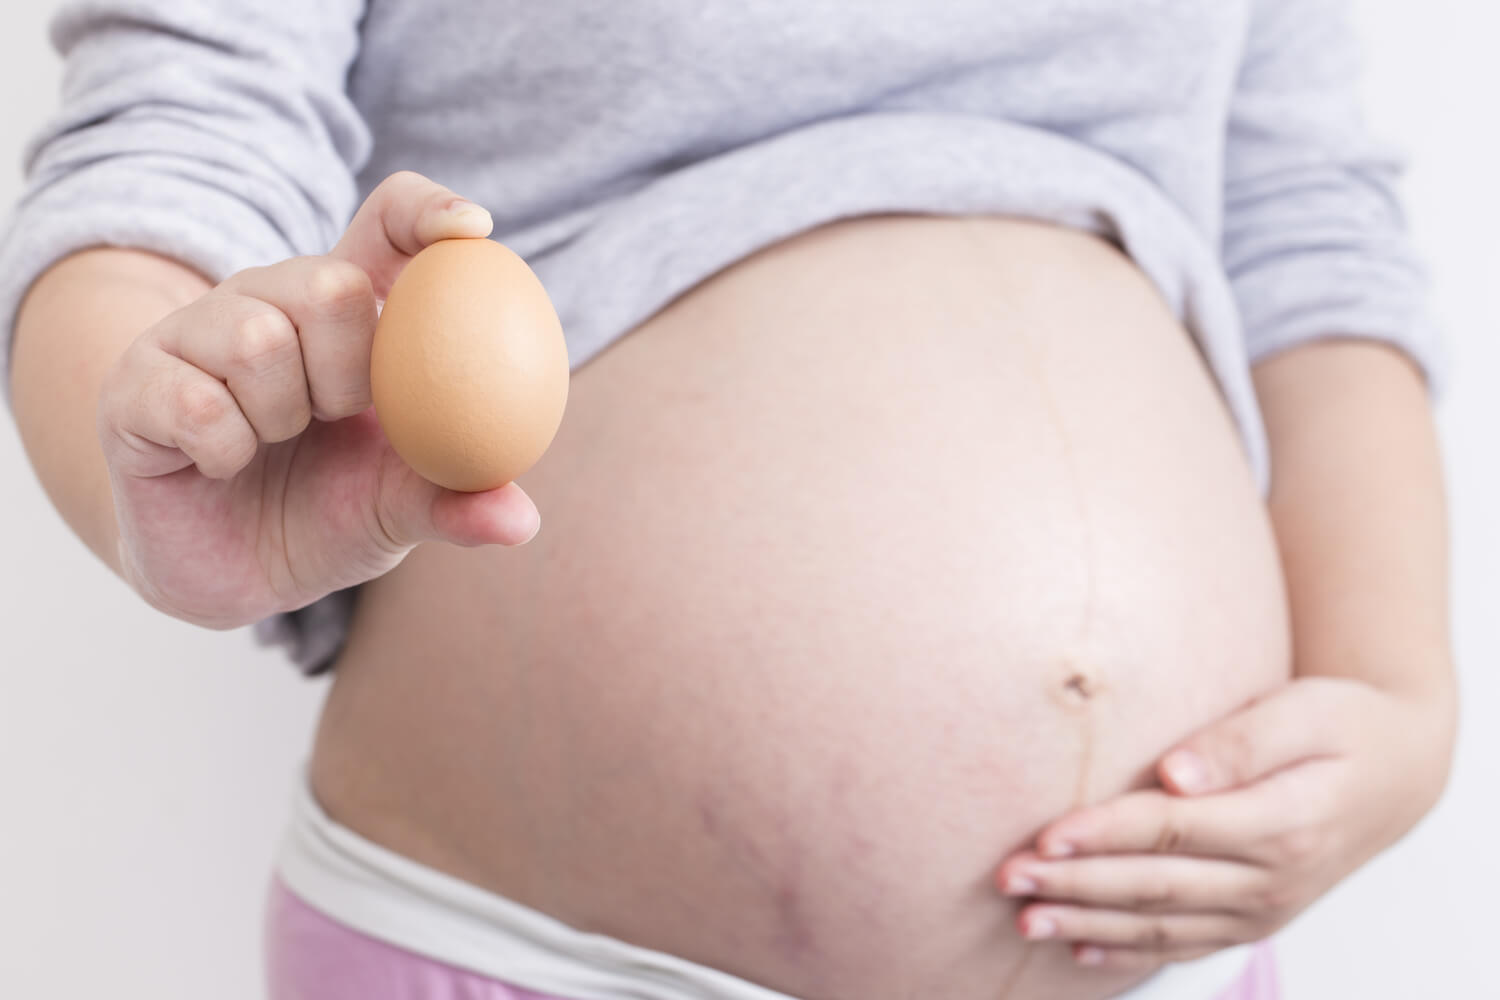 Eggs During Pregnancy